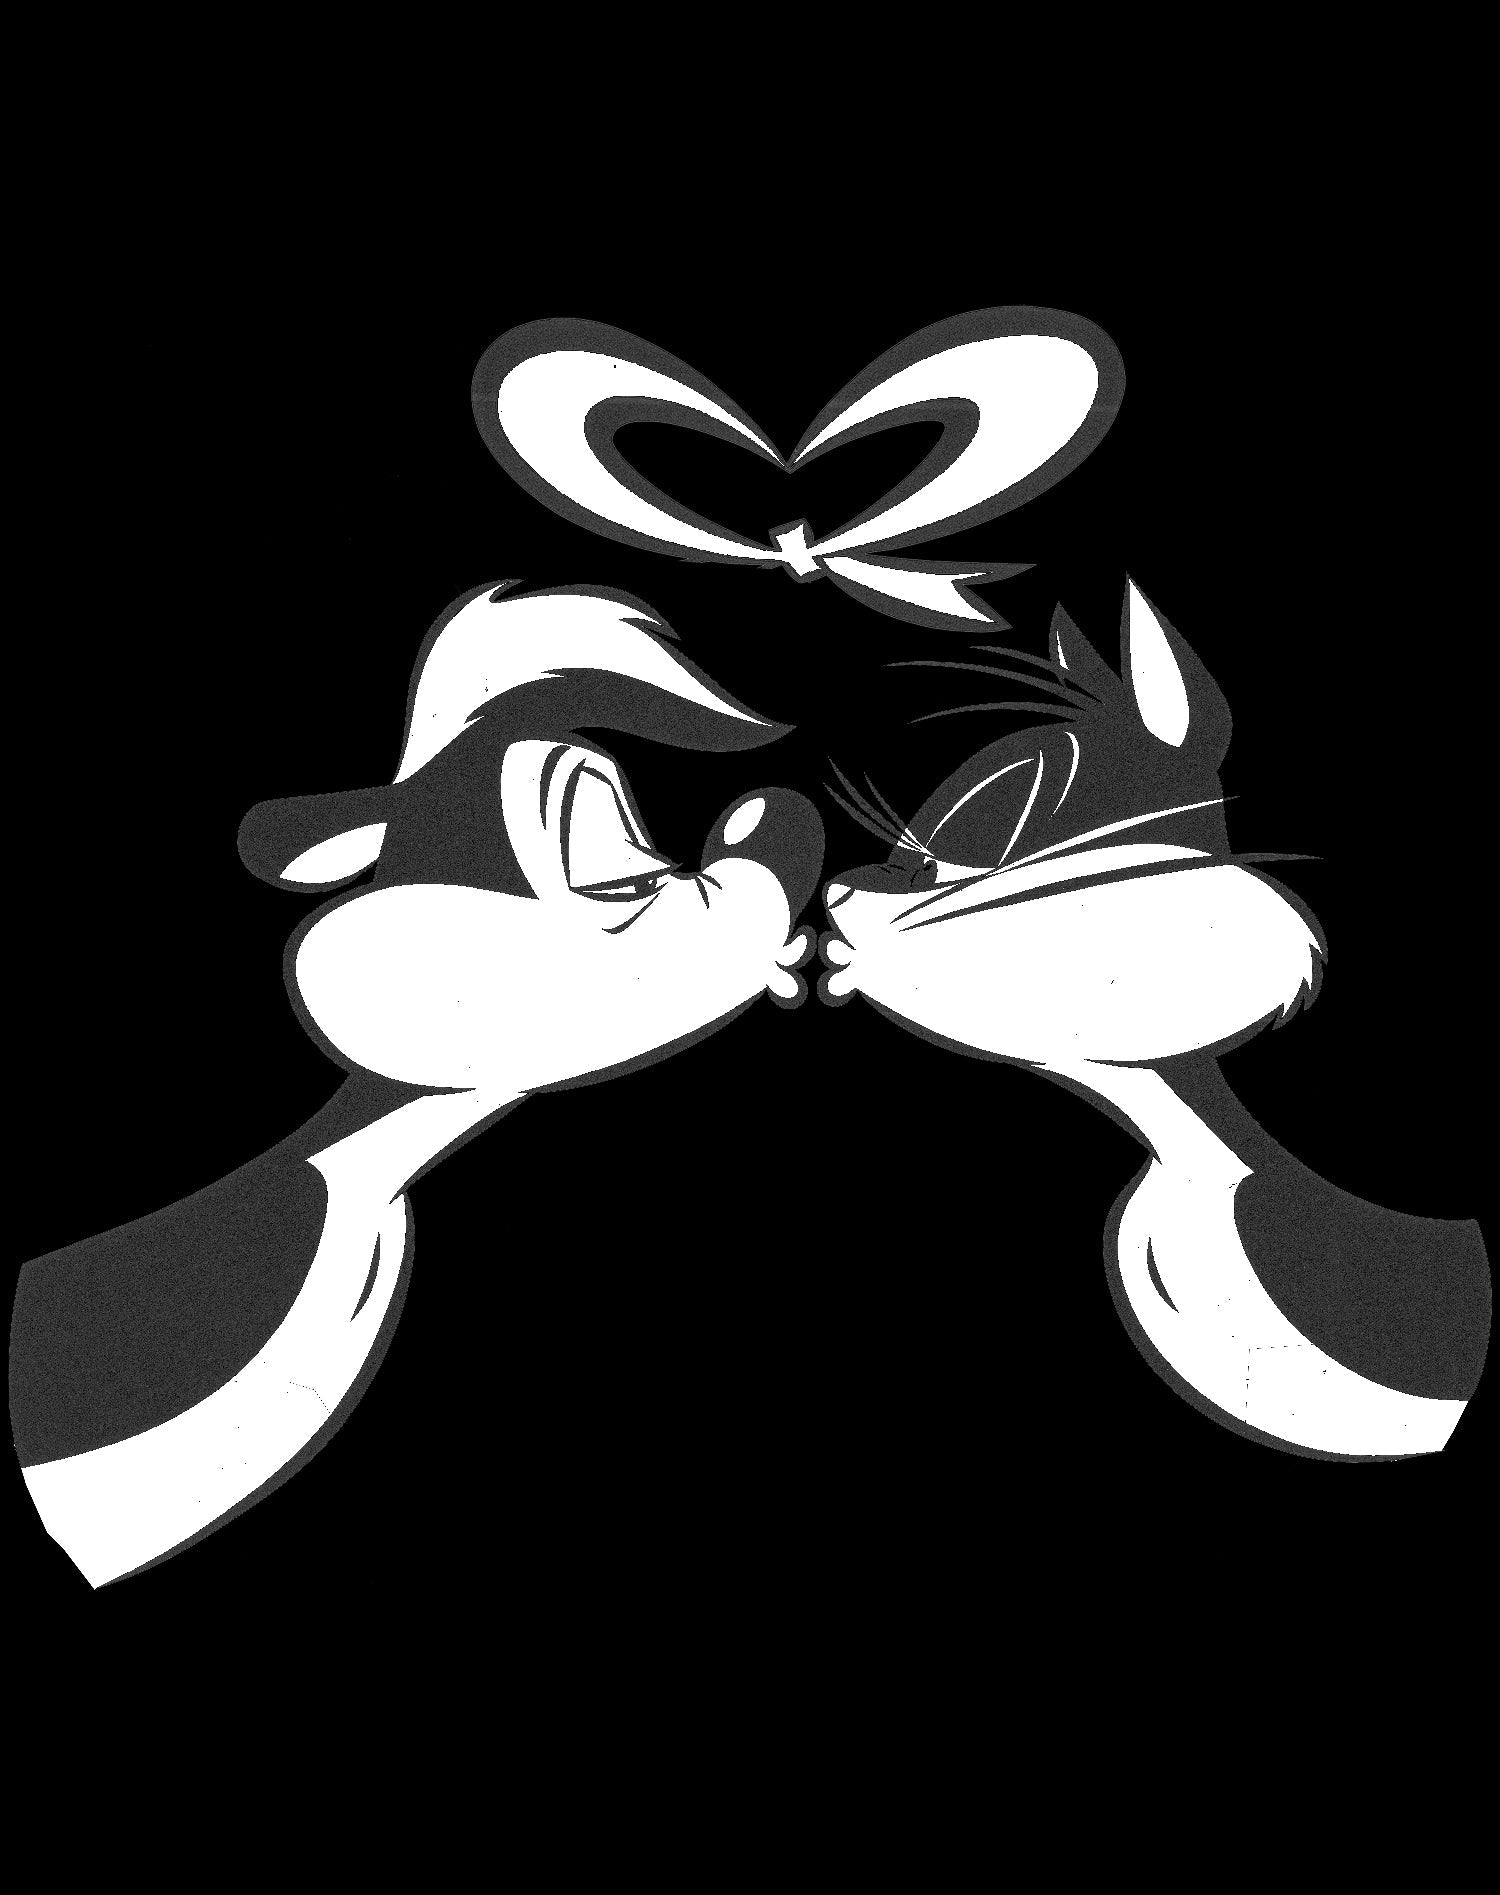 Looney Tunes Pepe Le Pew Valentines Kiss Official Men's T-Shirt